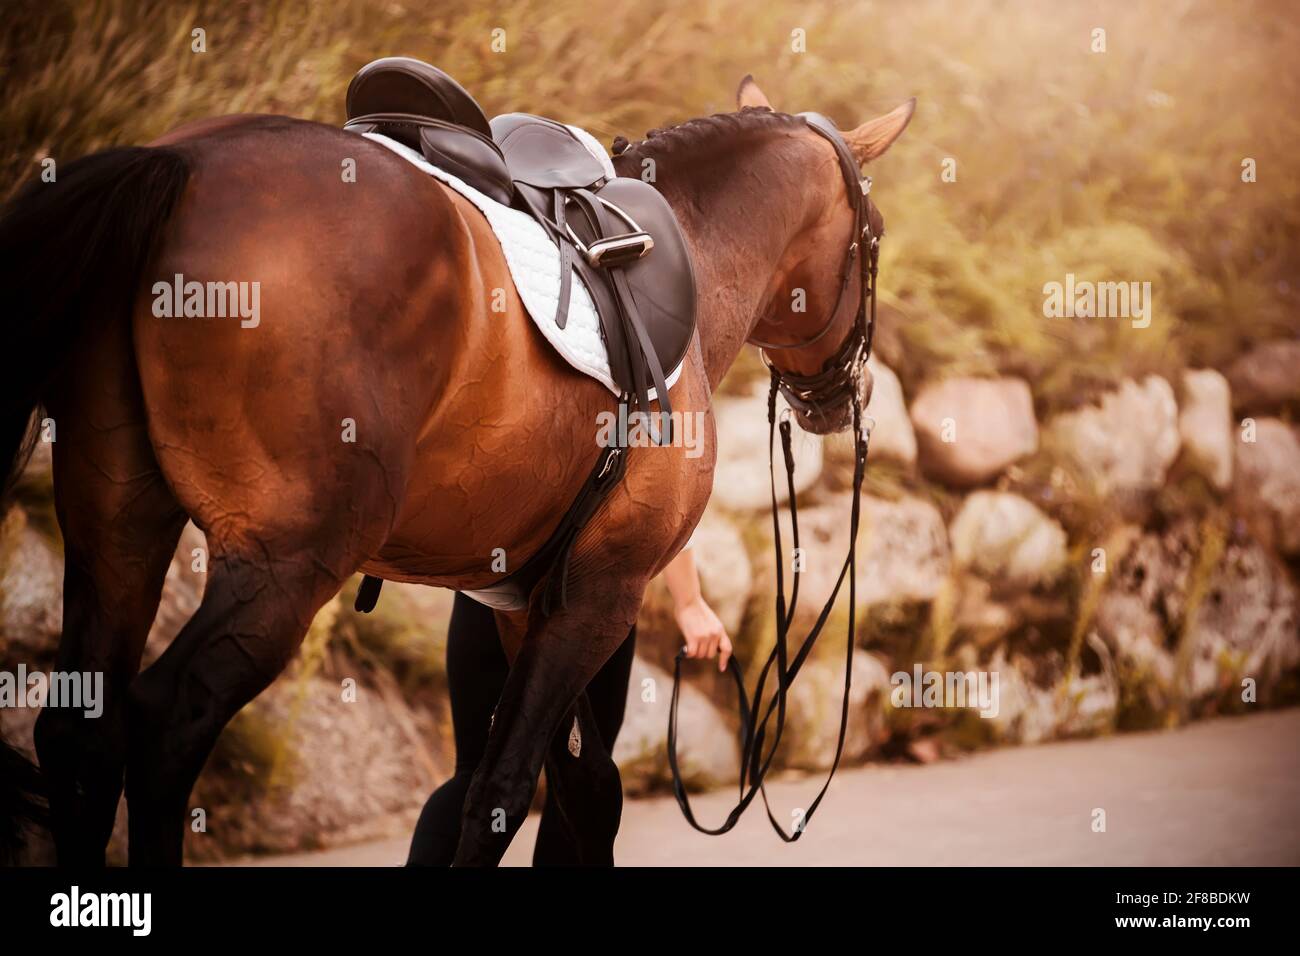 A chestnut saddled horse with a dark tail walks along the road with a rider who holds it by the bridle rein on an autumn day. Equestrian sports. Stock Photo